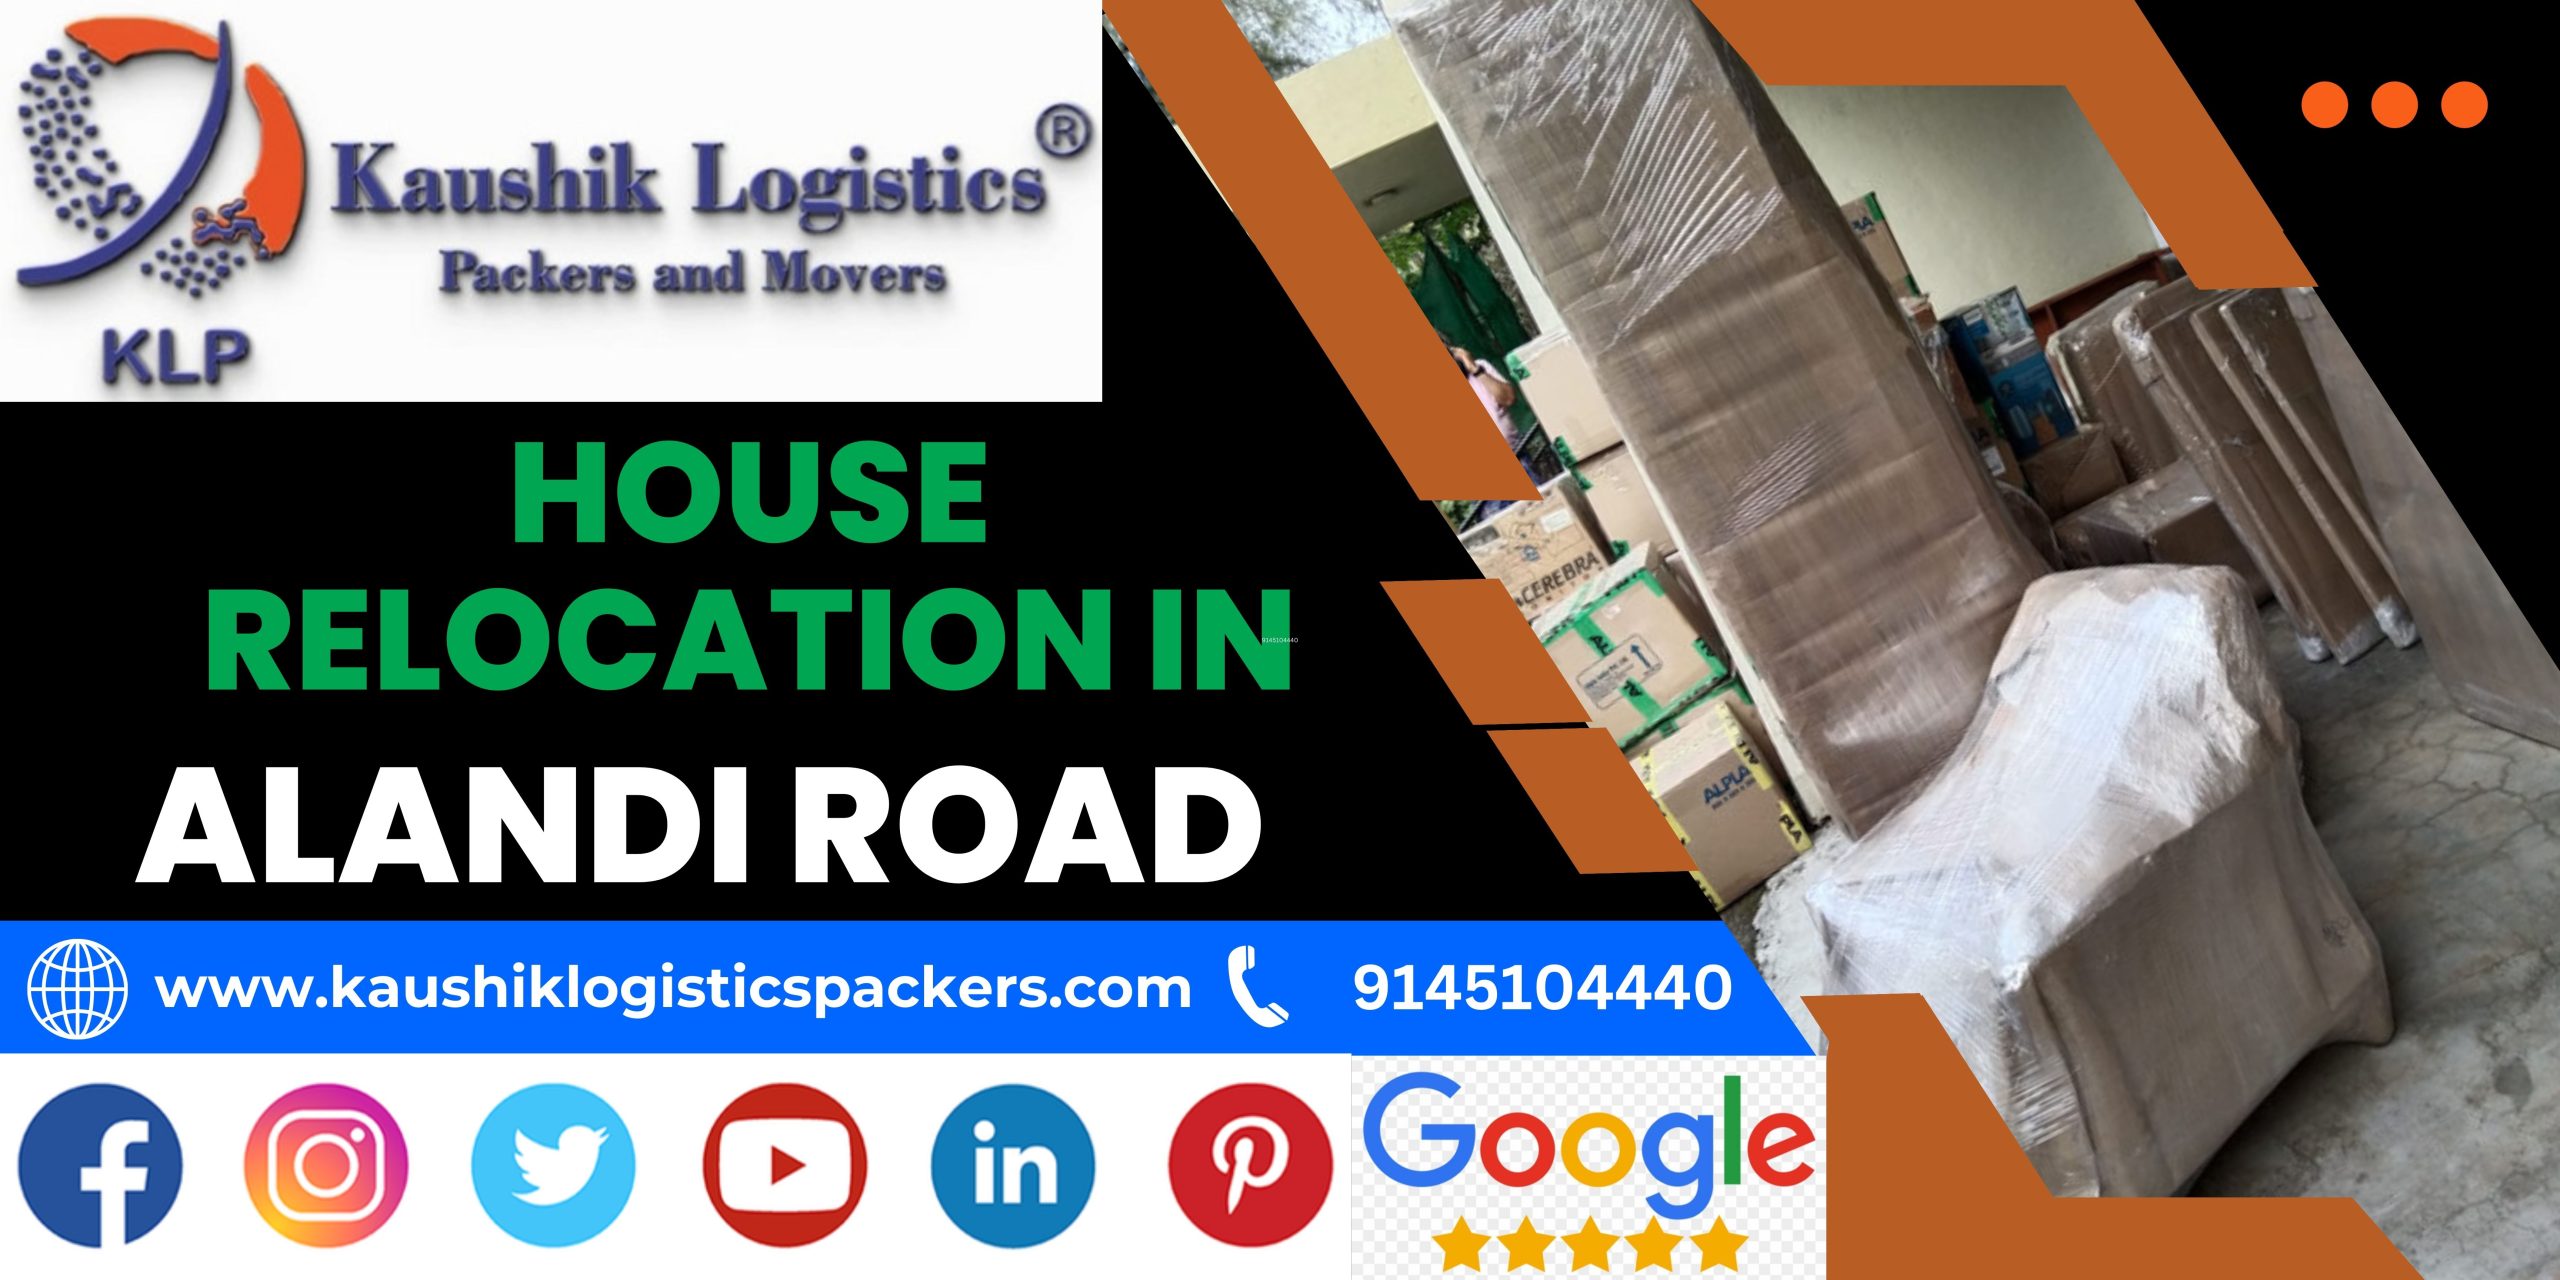 Packers and Movers In Alandi Road